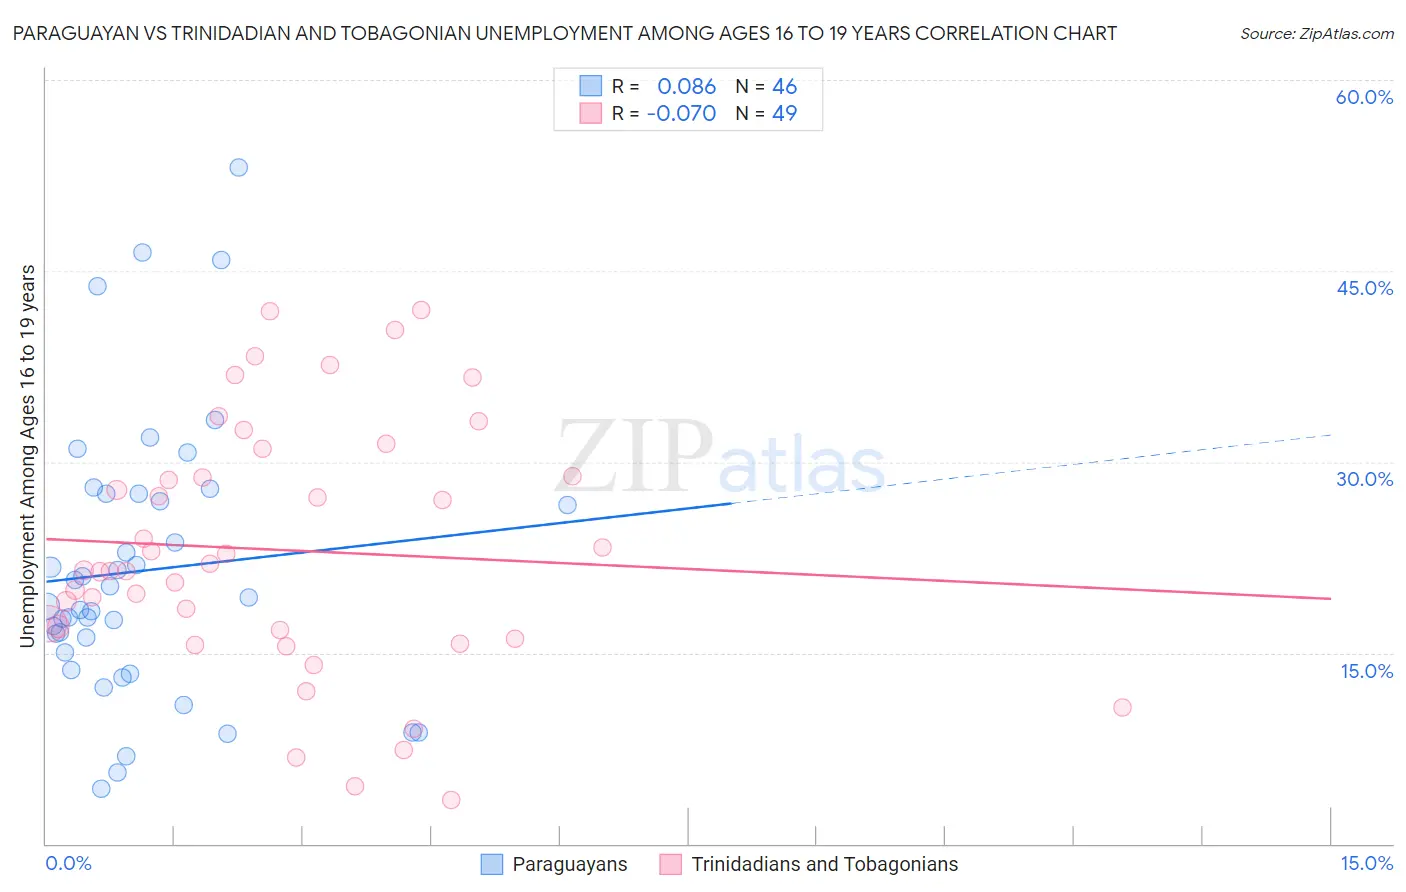 Paraguayan vs Trinidadian and Tobagonian Unemployment Among Ages 16 to 19 years